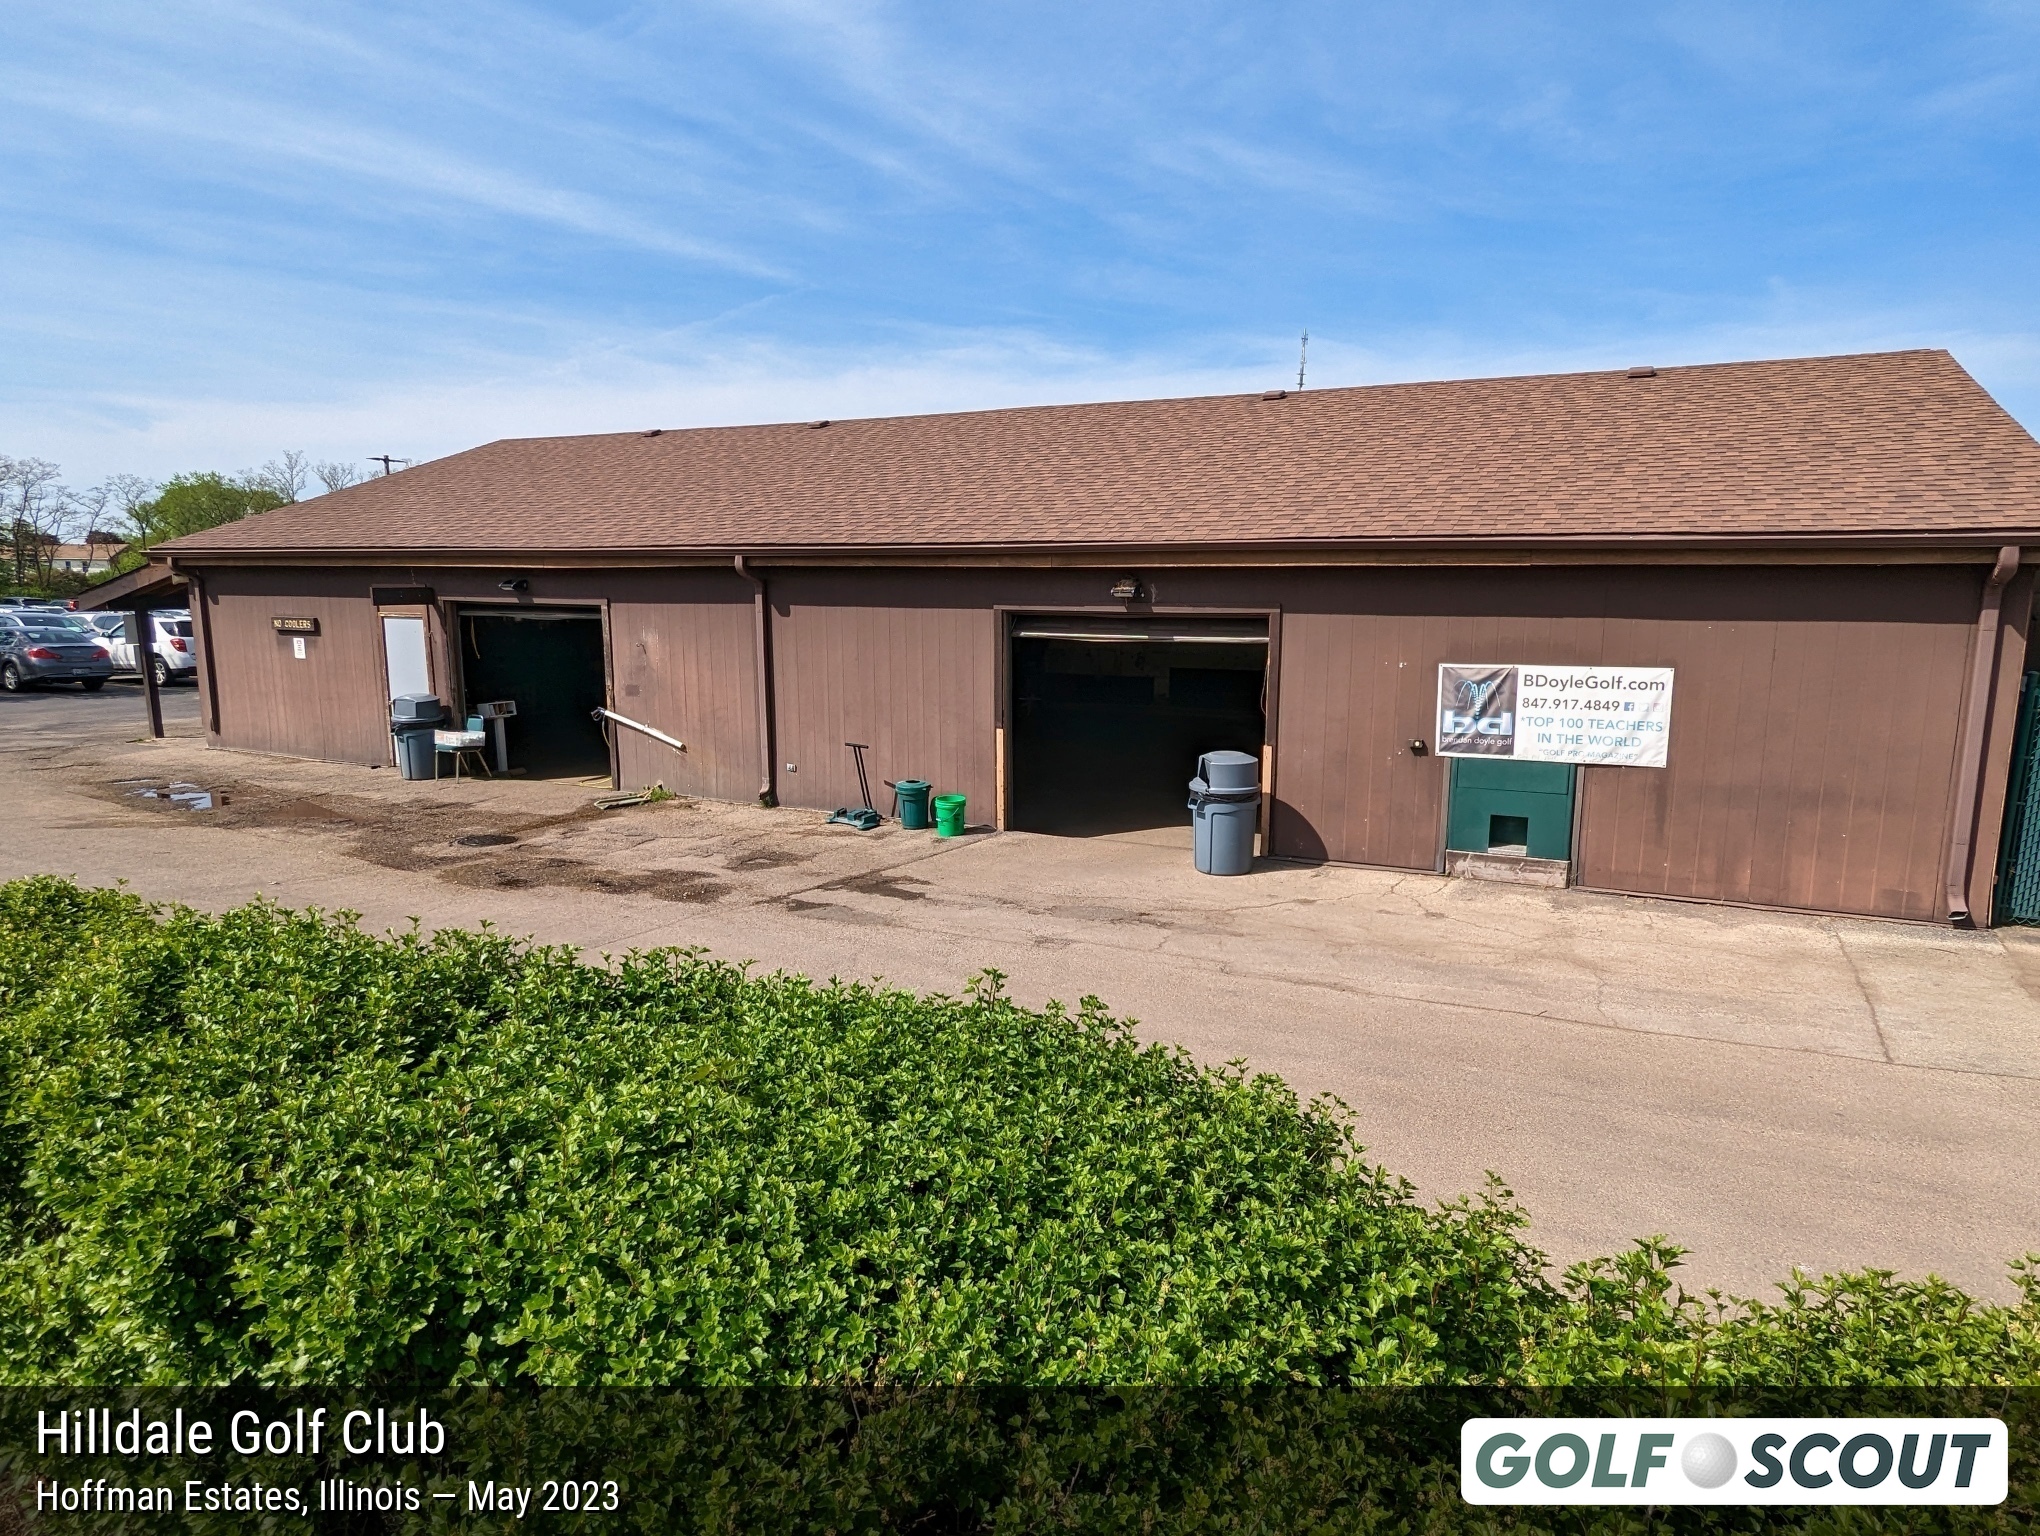 Miscellaneous photo of Hilldale Golf Club in Hoffman Estates, Illinois. This is the cart barn. Last time I was here, there was a crate of gently used golf balls for $1 each. Many looked brand new and were top brands. Pretty good deal! I bought 10.